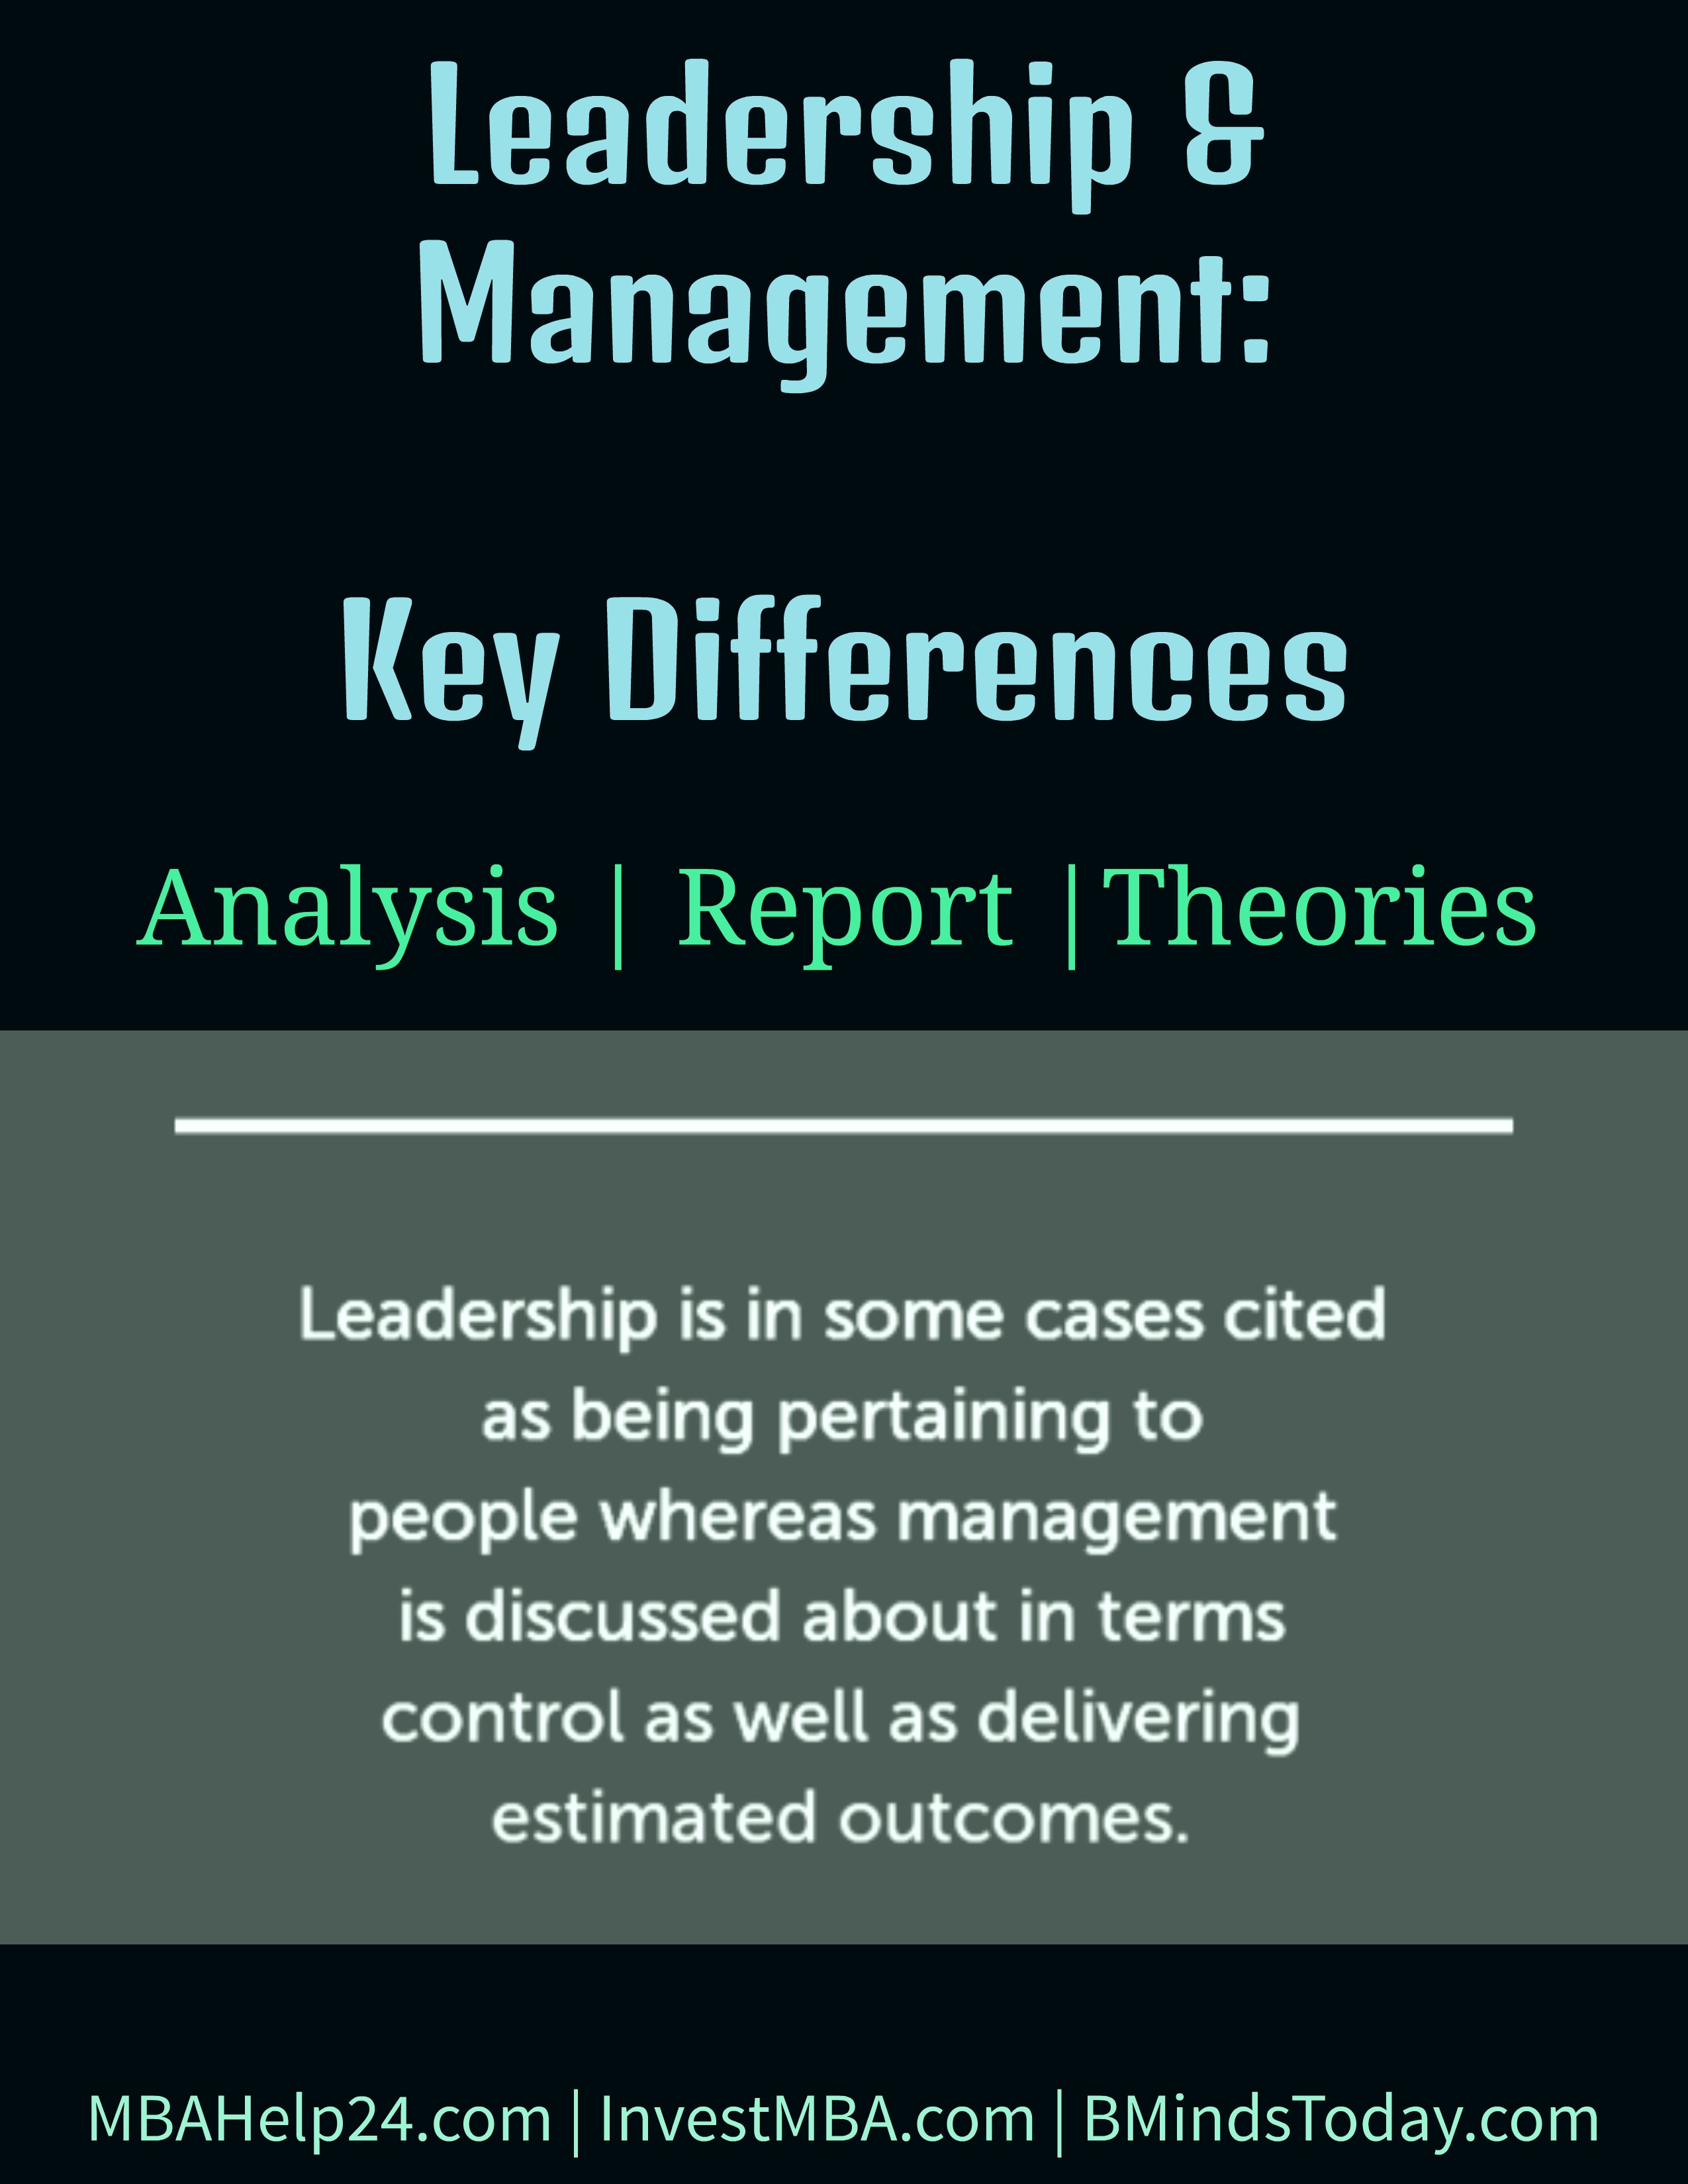 Leadership & Management | Key Differences leadership Leadership &#038; Management: Key Differences Leadership and Management Key Differences leadership and management | key differences Leadership and Management | Key Differences Leadership and Management Key Differences